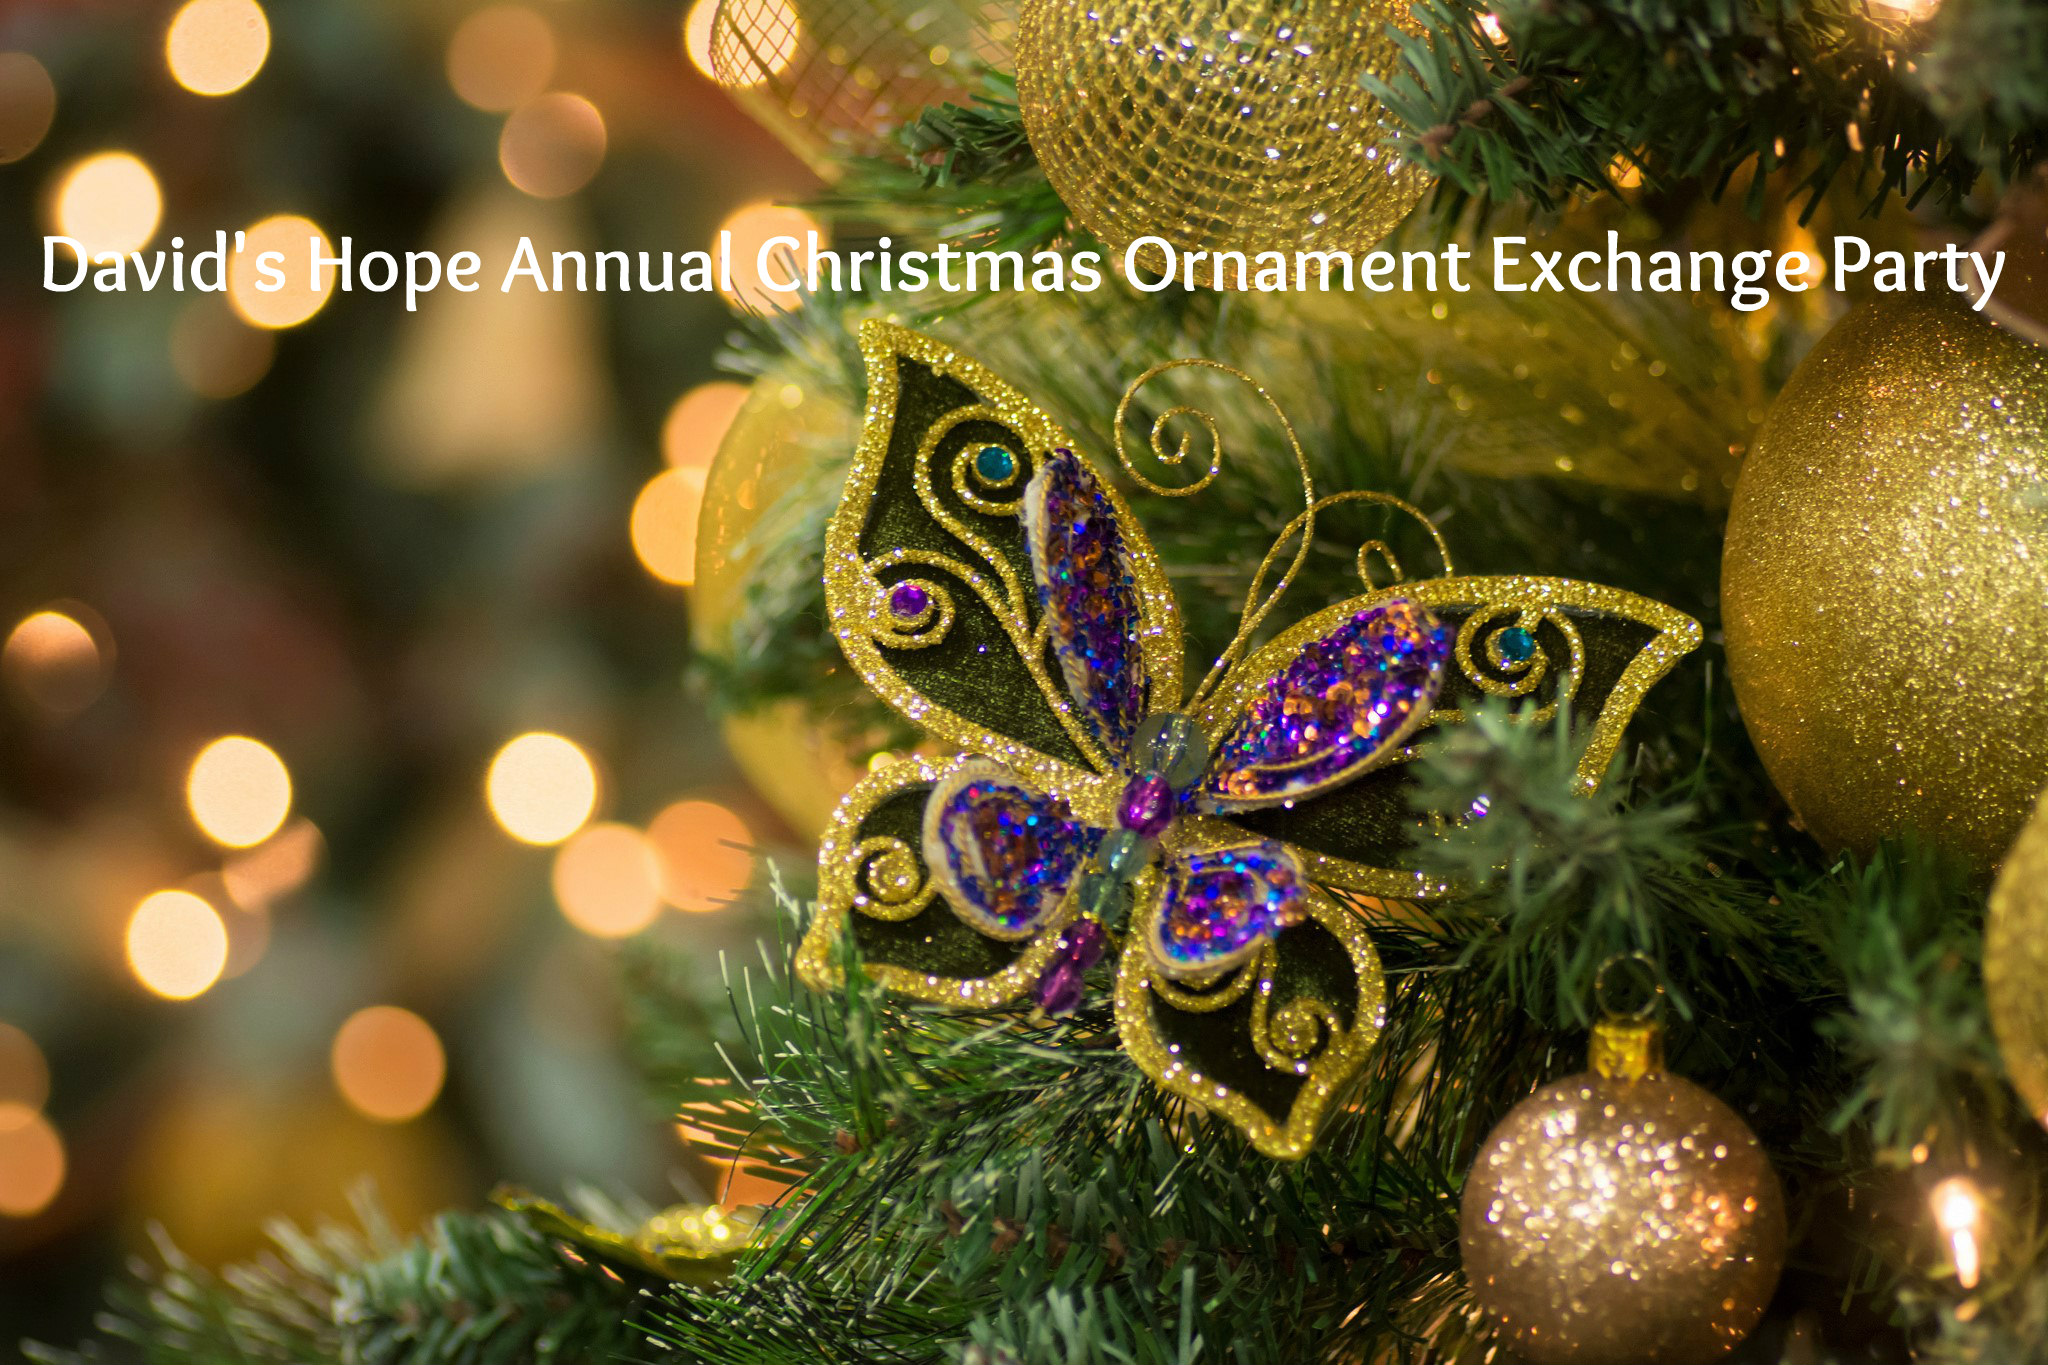 When: FRIDAY, DECEMBER 17, 2021 AT 7 PM – 8 PM
Where: 417 Almond St, Nampa, ID 83686
Join us as we celebrate Christmas with a family friendly ornament exchange, door prizes, games and snacks. Each person (including children) bring a wrapped ornament for a fun exchange!